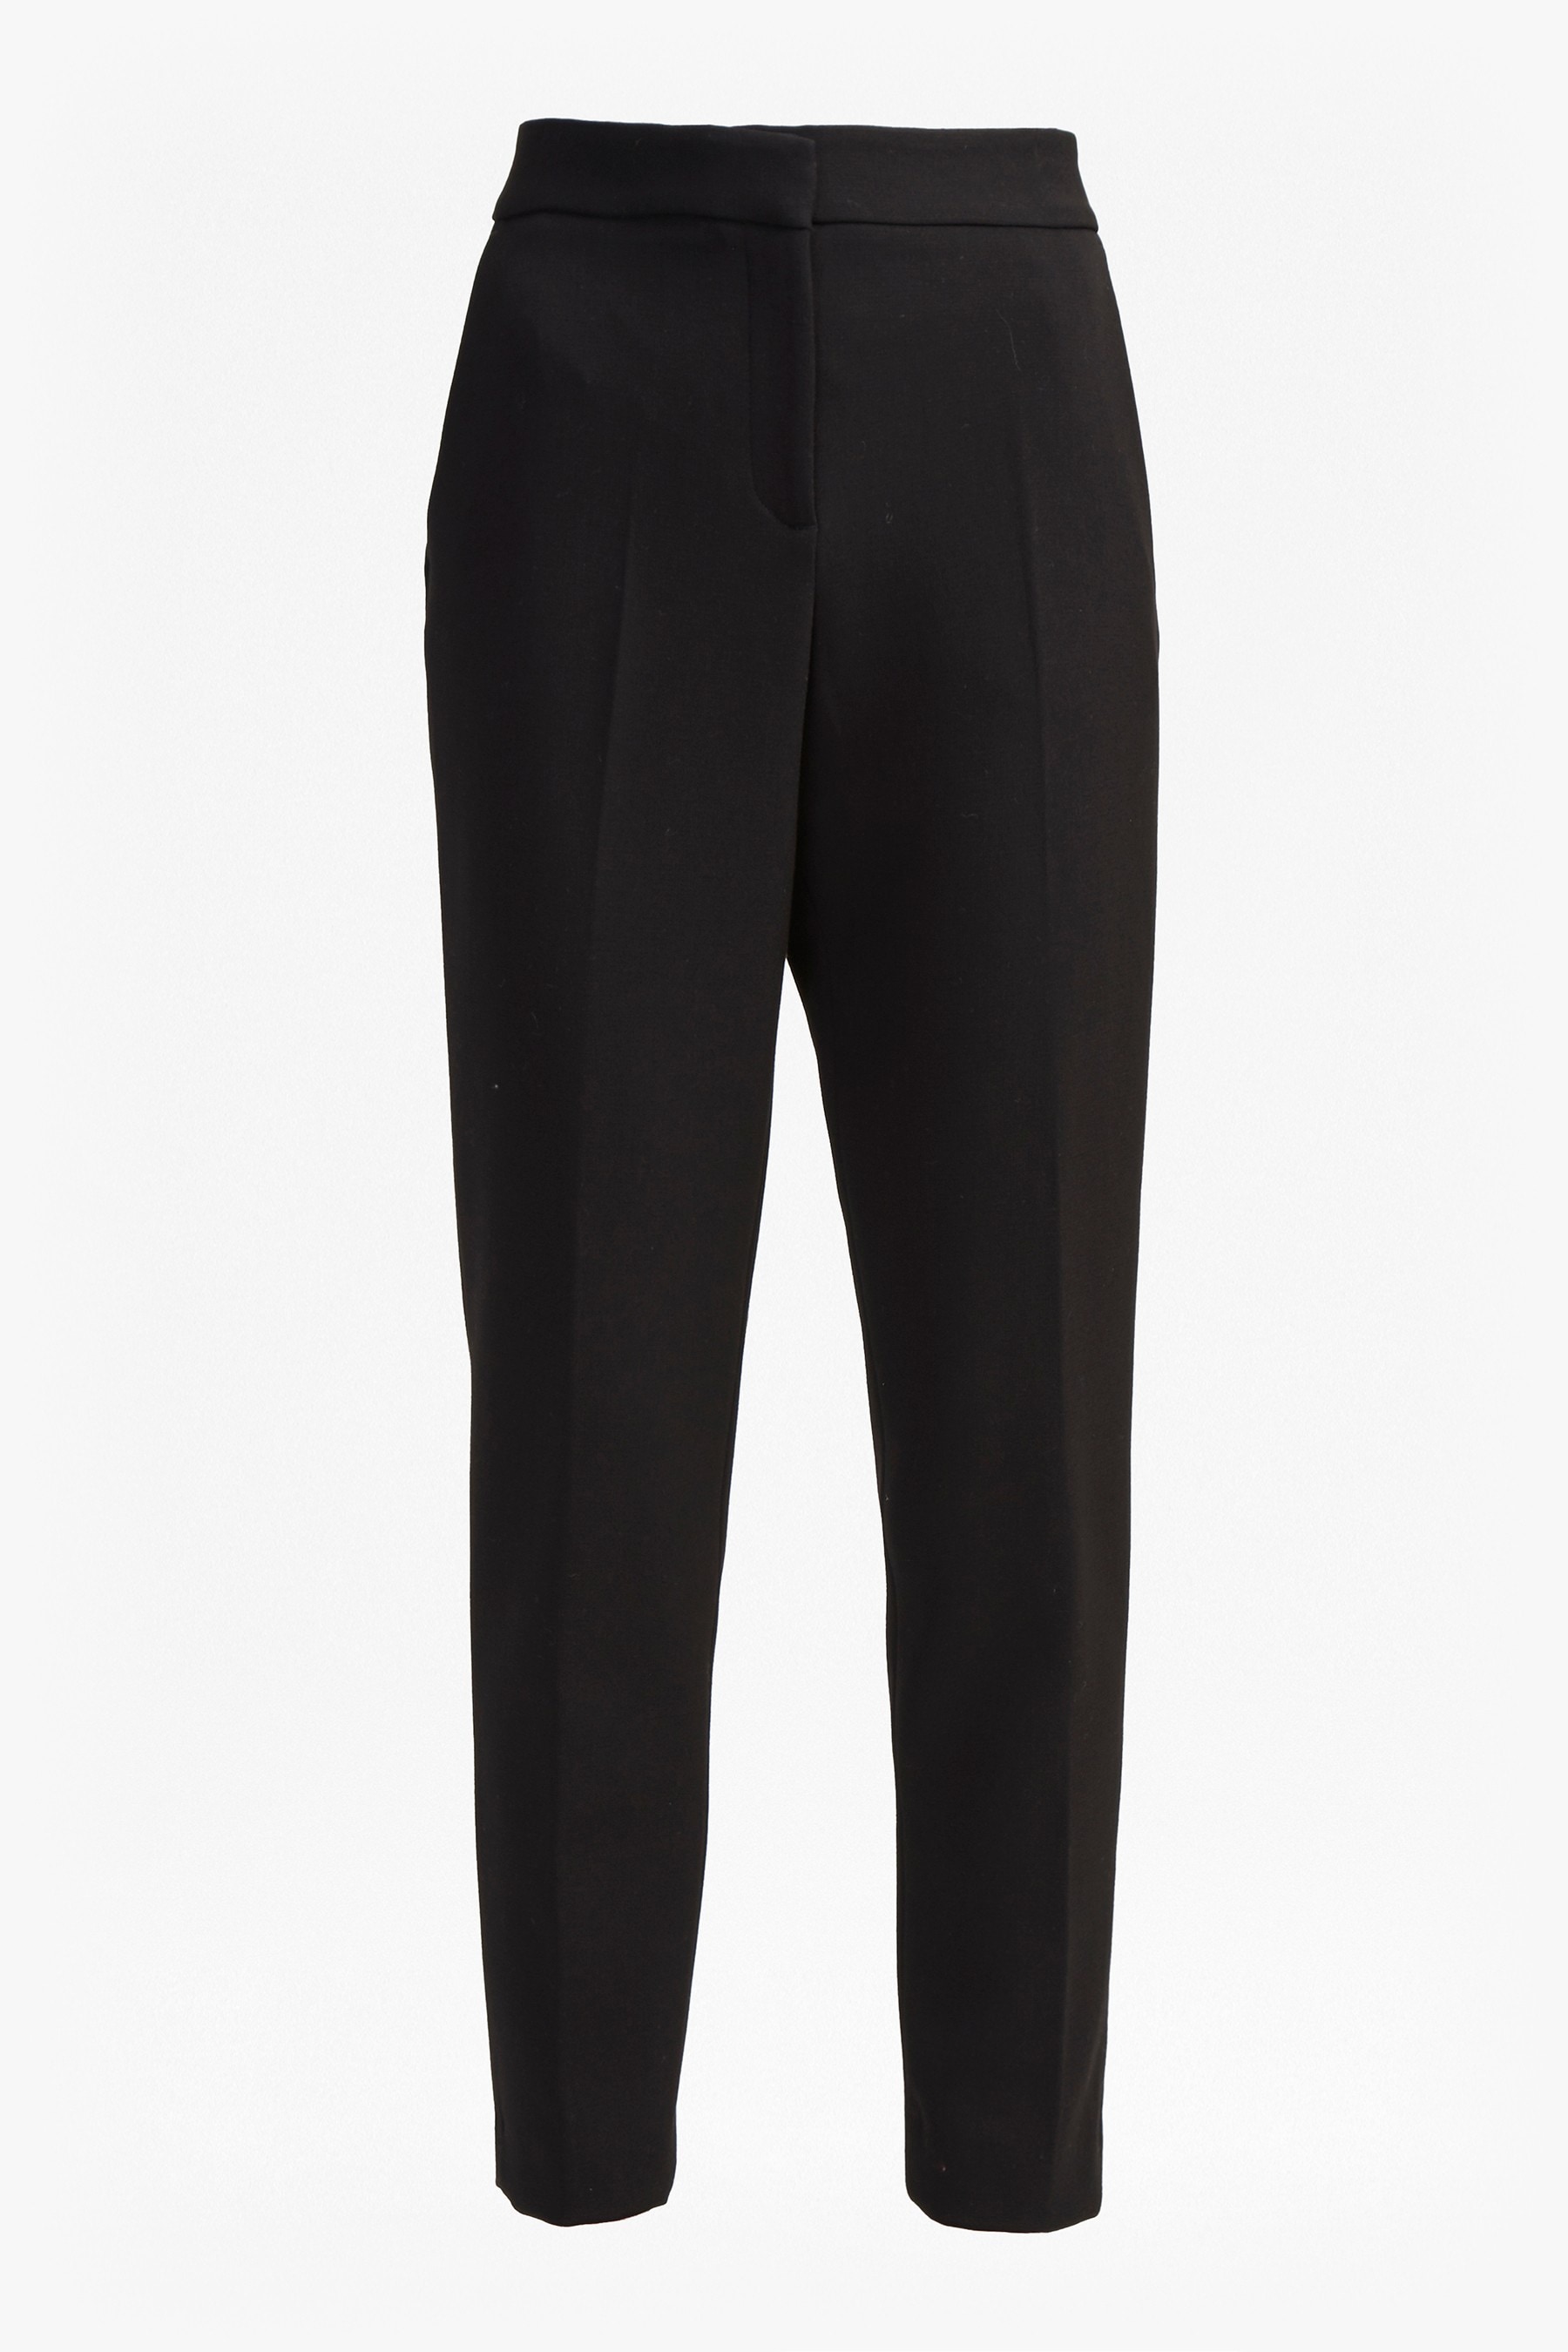 Buy French Connection Black Whisper Ruth Tailored Trousers from Next ...